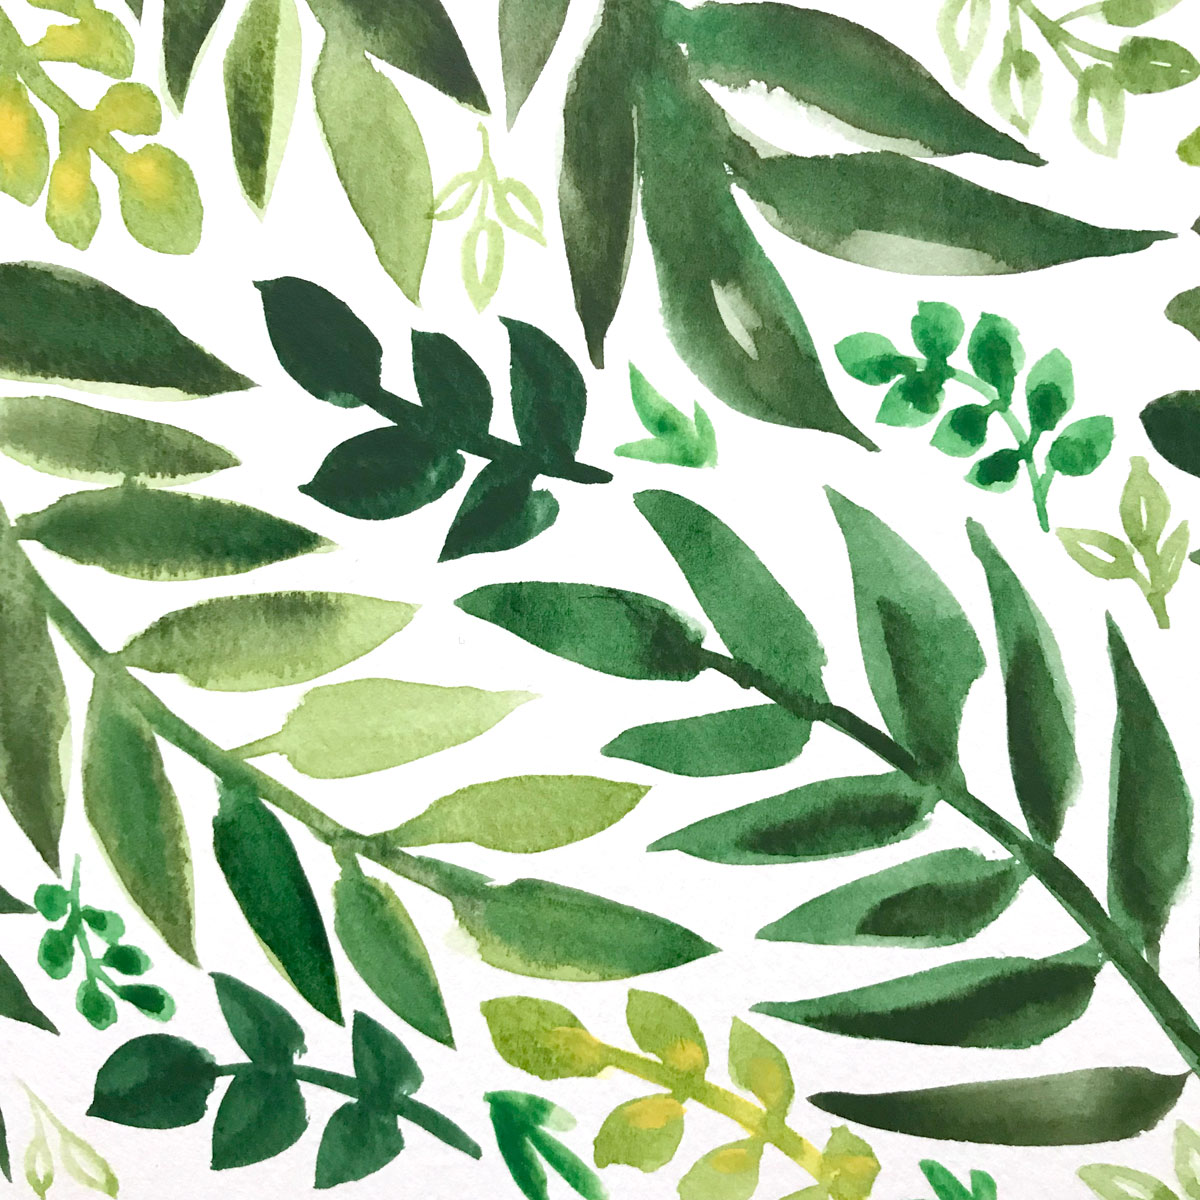 Hand-painted greenery leaves for a California wedding by artist Michelle Mospens. - Mospens Studio